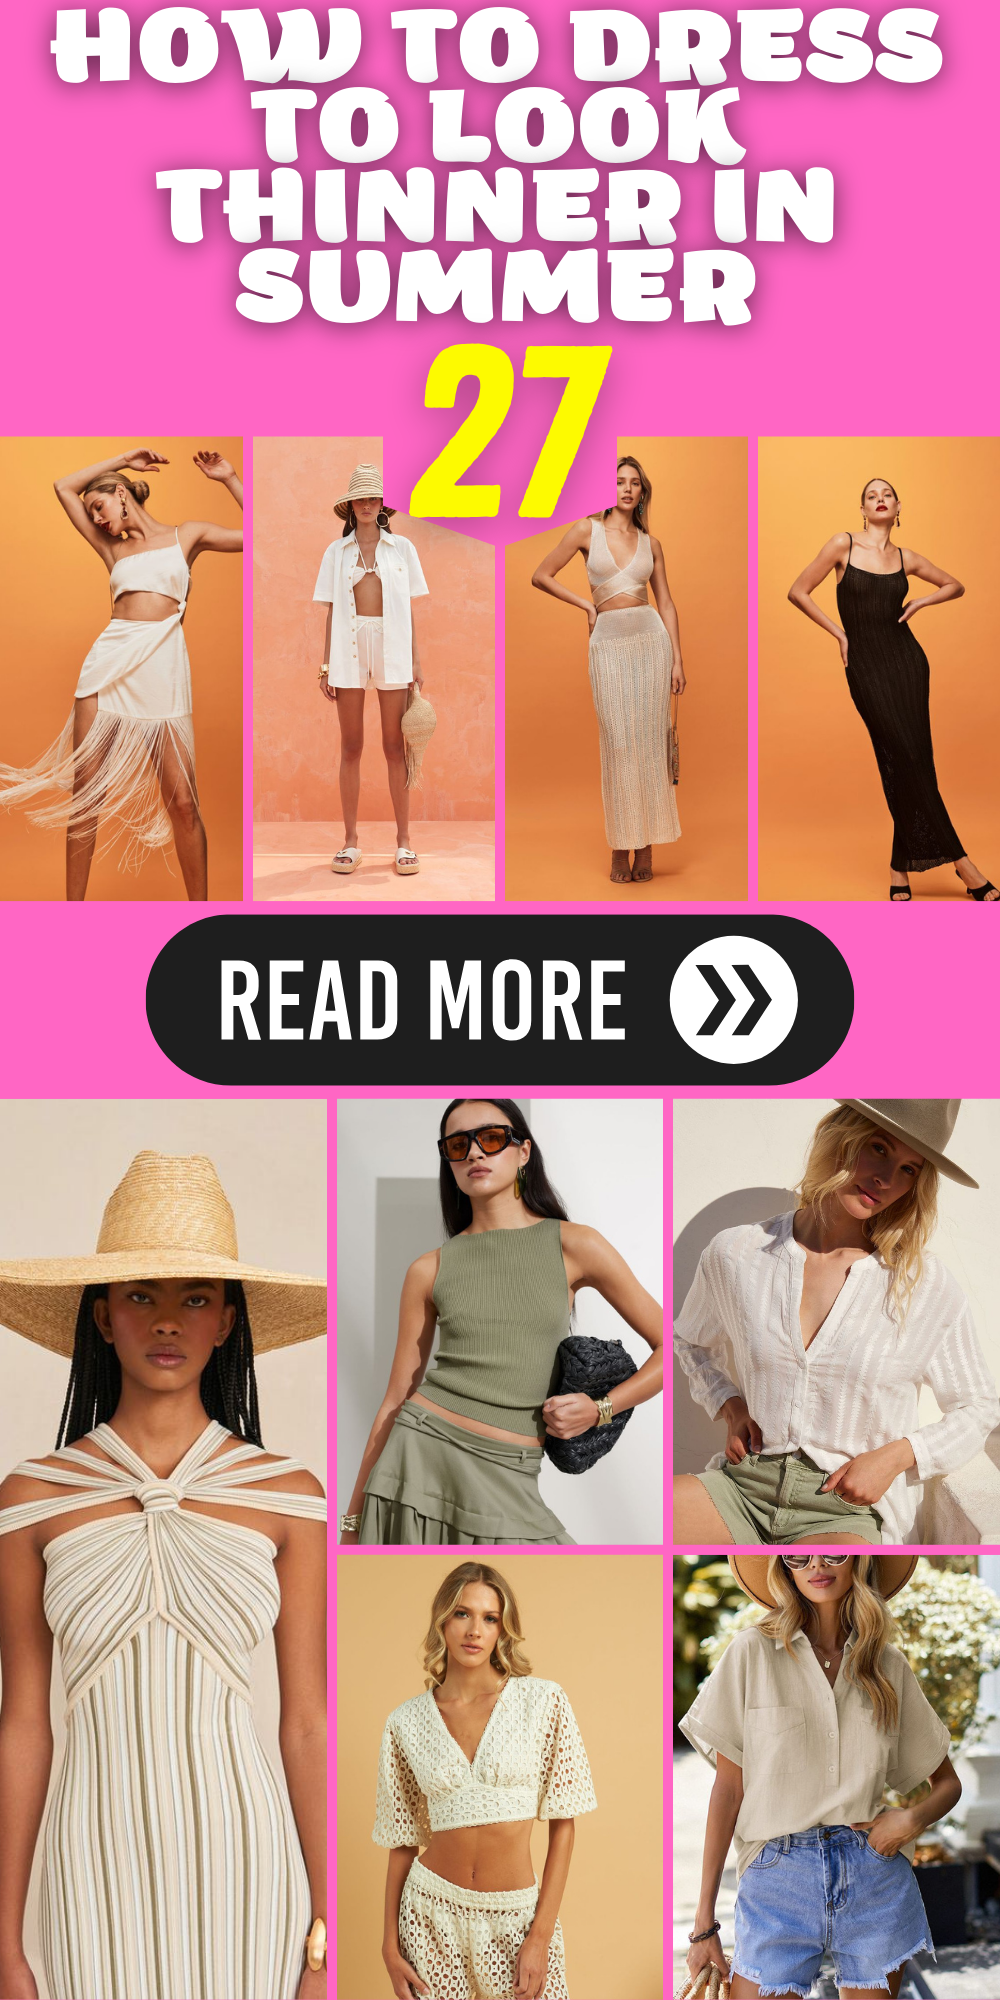 Flatter Your Figure: Tips on How to Dress to Look Thinner in Summer